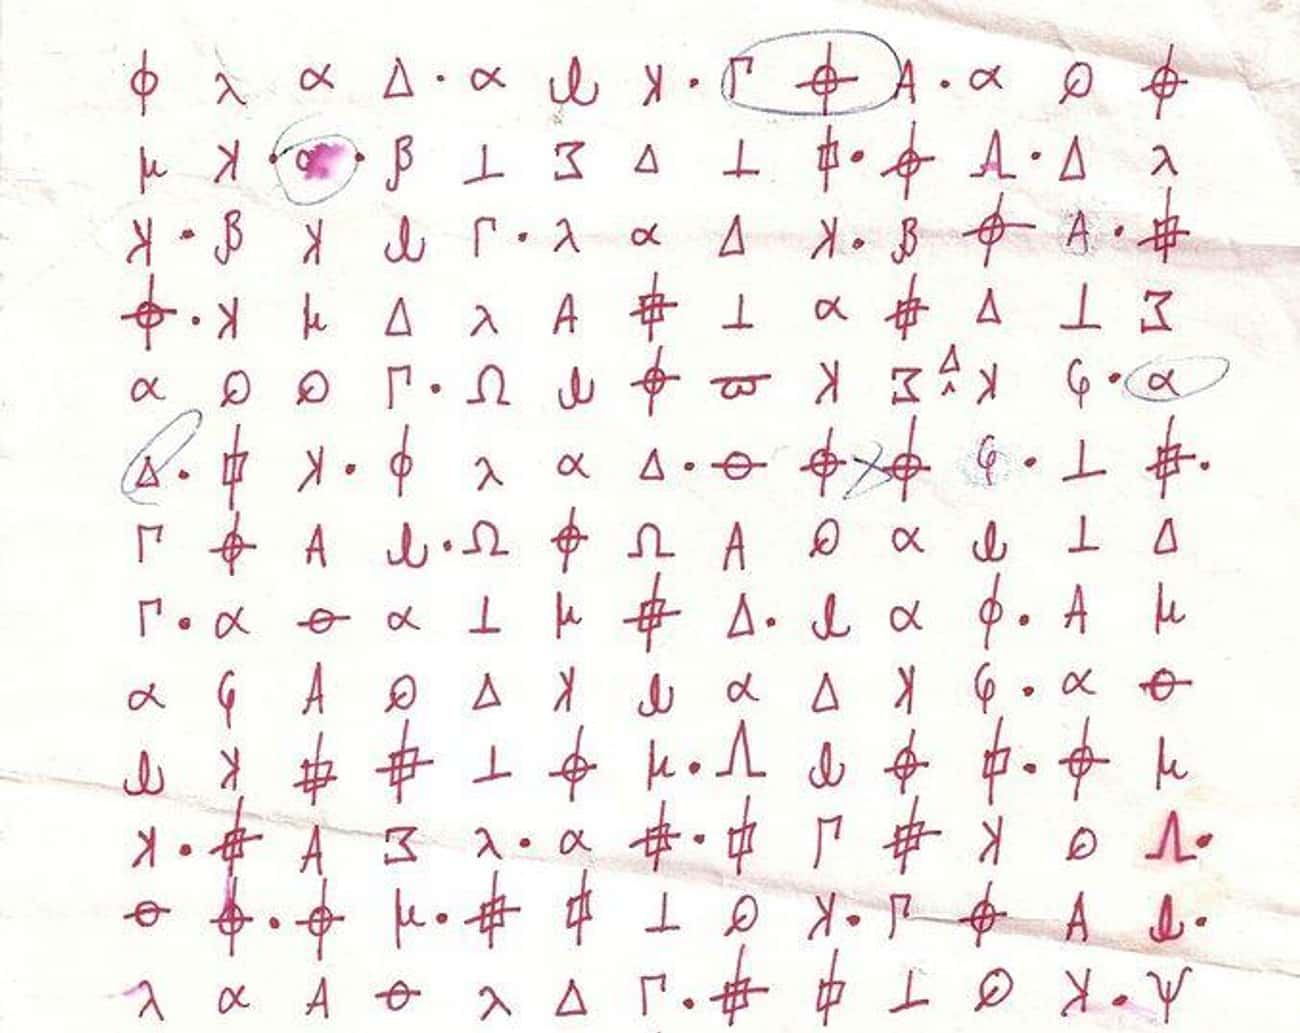 The Zodiac Killer Sent Cryptic, Coded Messages To The Police